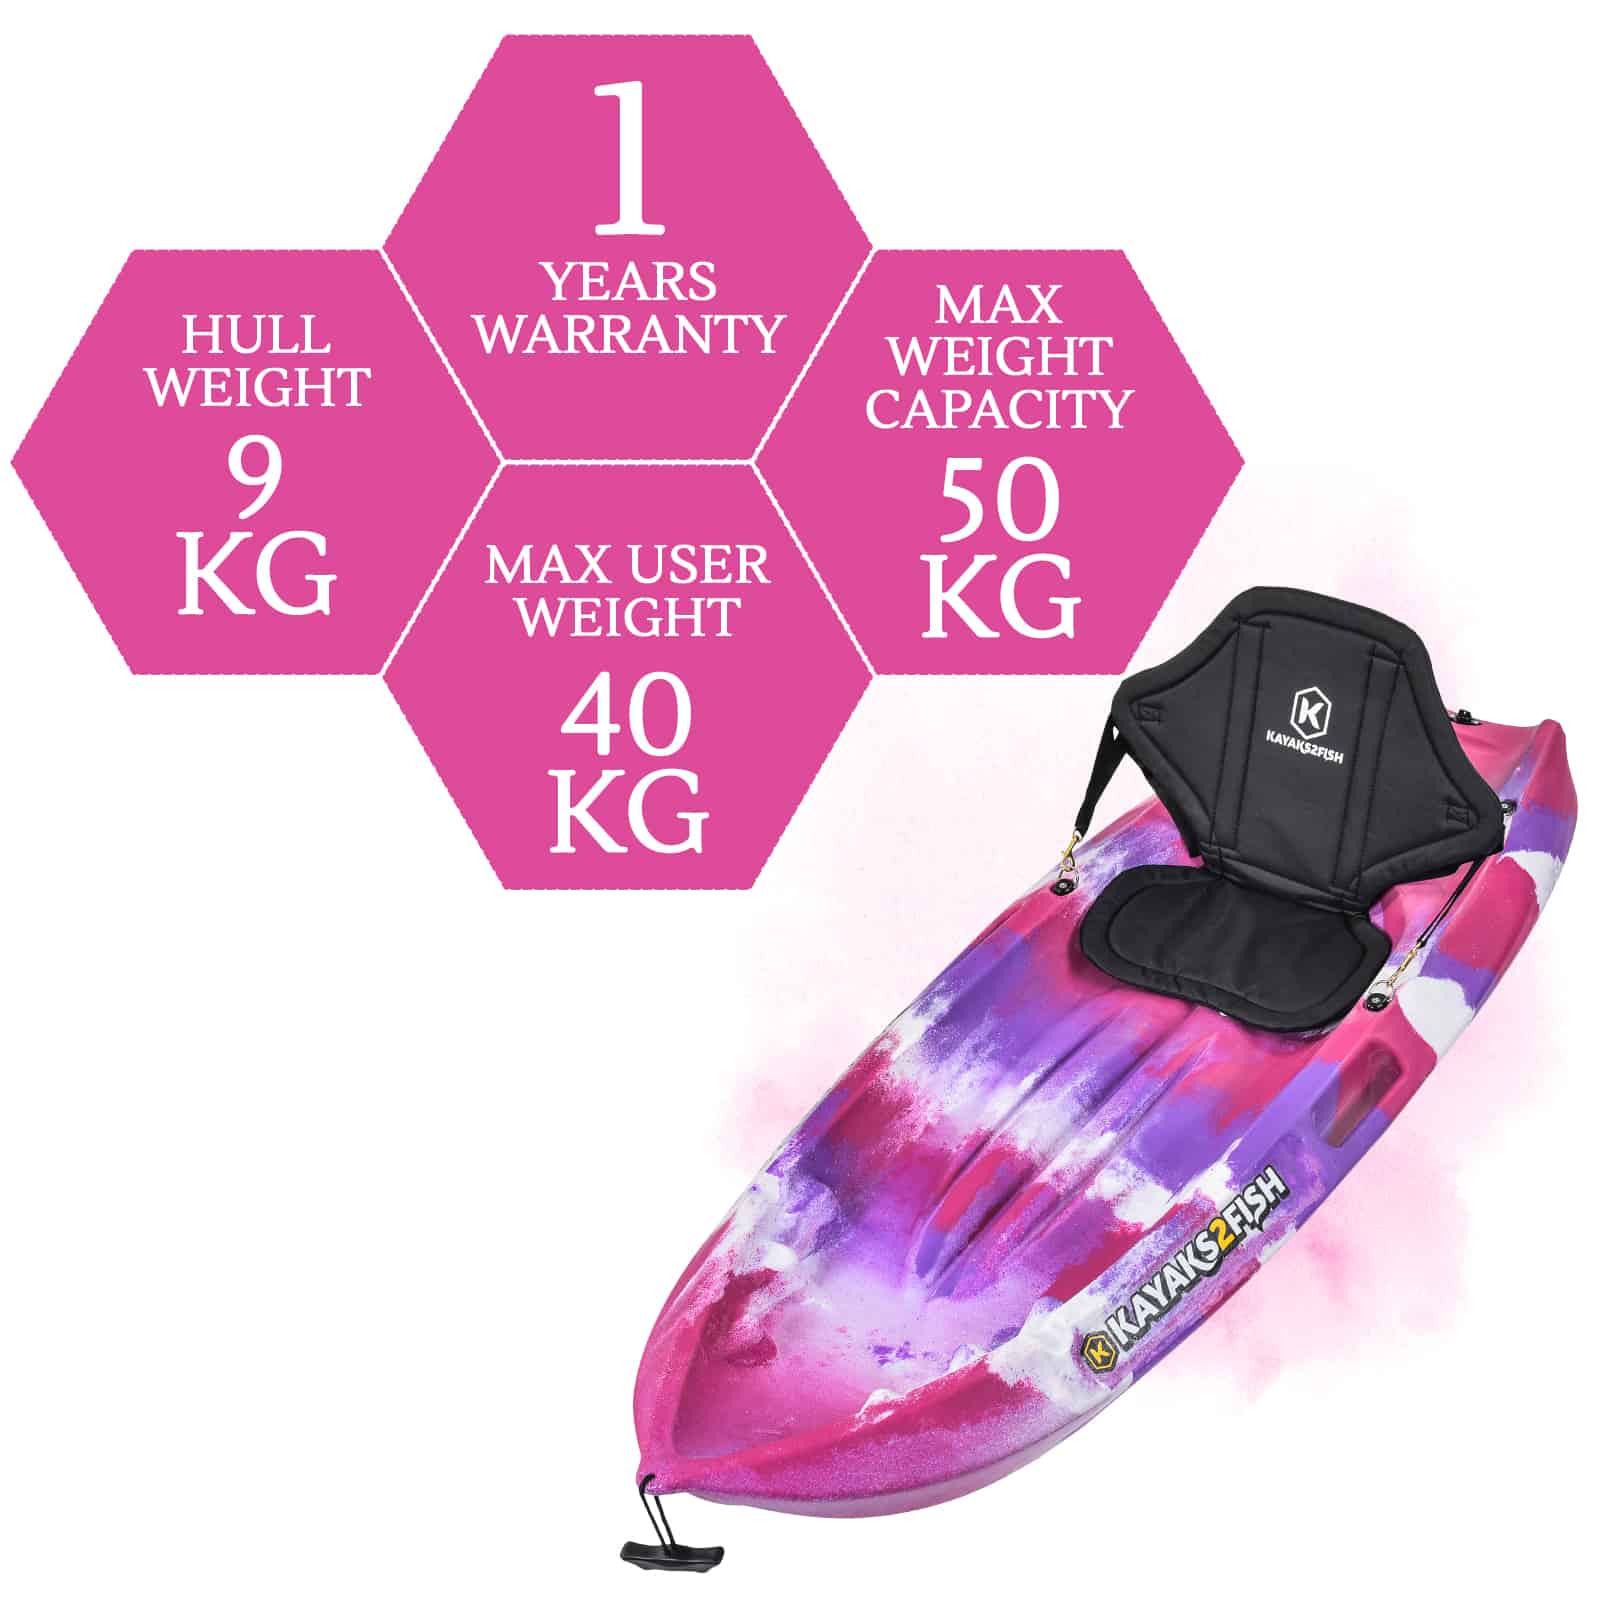 K2FM-PUFFIN-PINKCAMO specifications